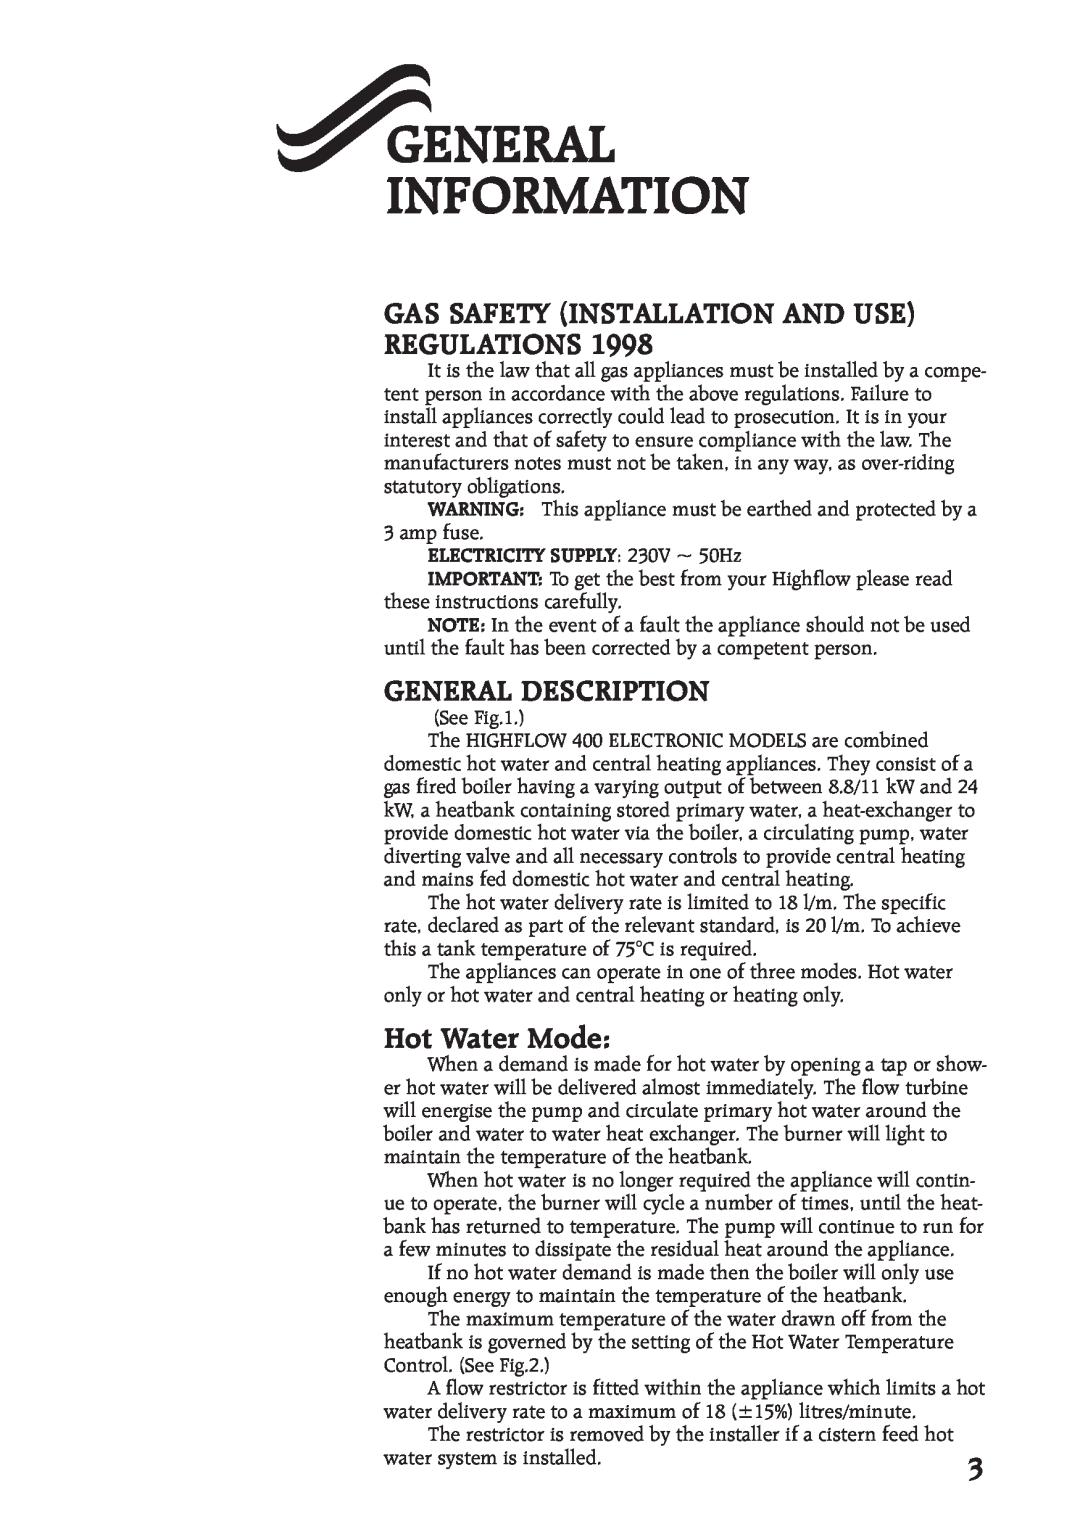 Compex Technologies 400 manual General Information, Gas Safety Installation And Use Regulations, General Description 